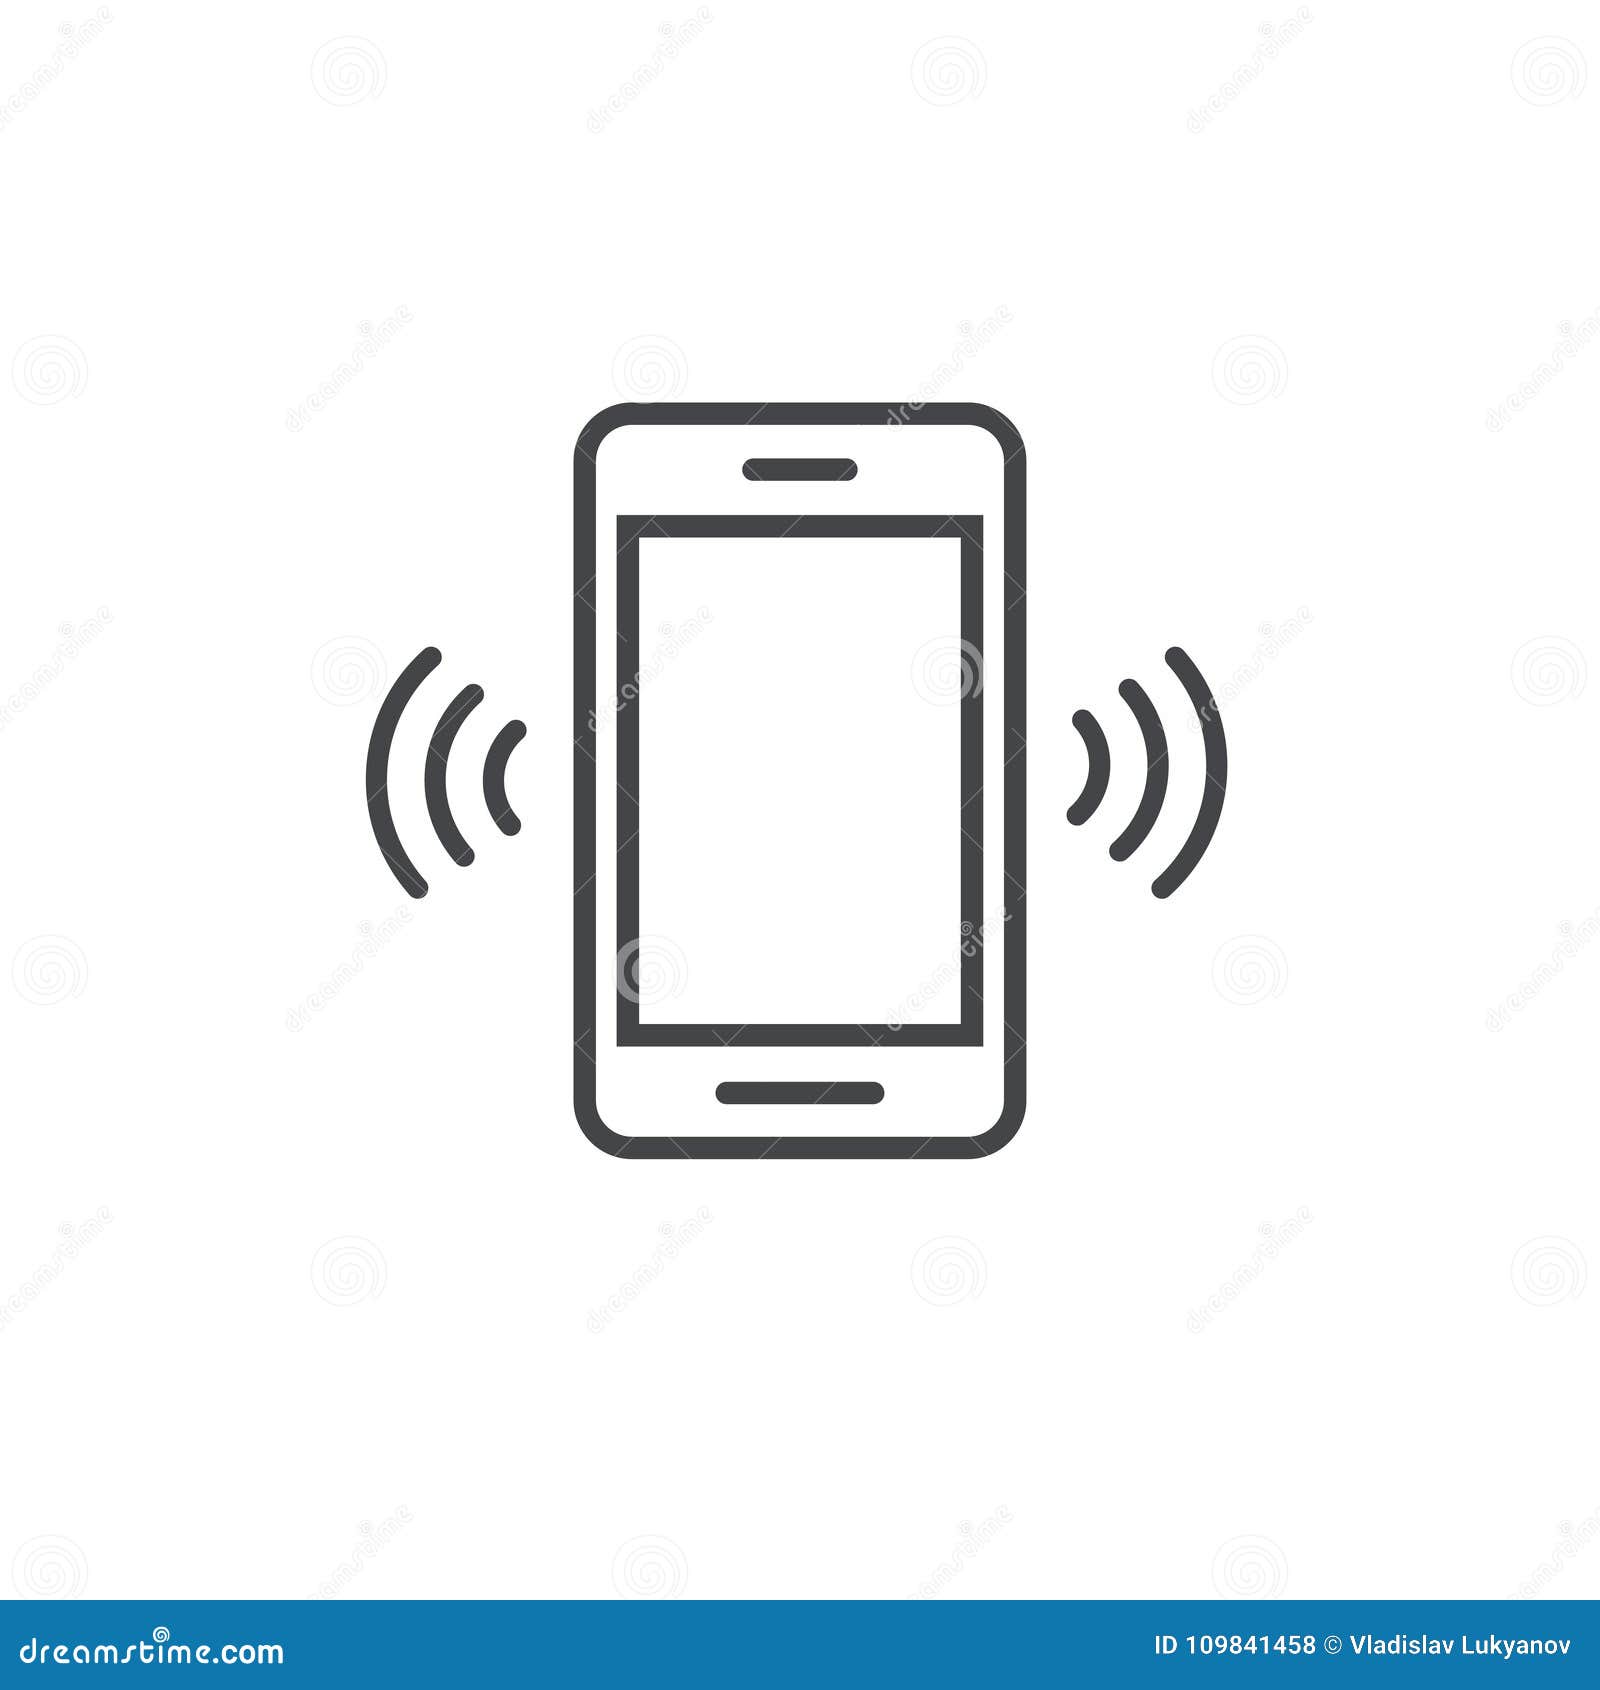 smartphone or mobile phone ringing  icon, line art outline cellphone call or vibrate pictogram, ring of phone